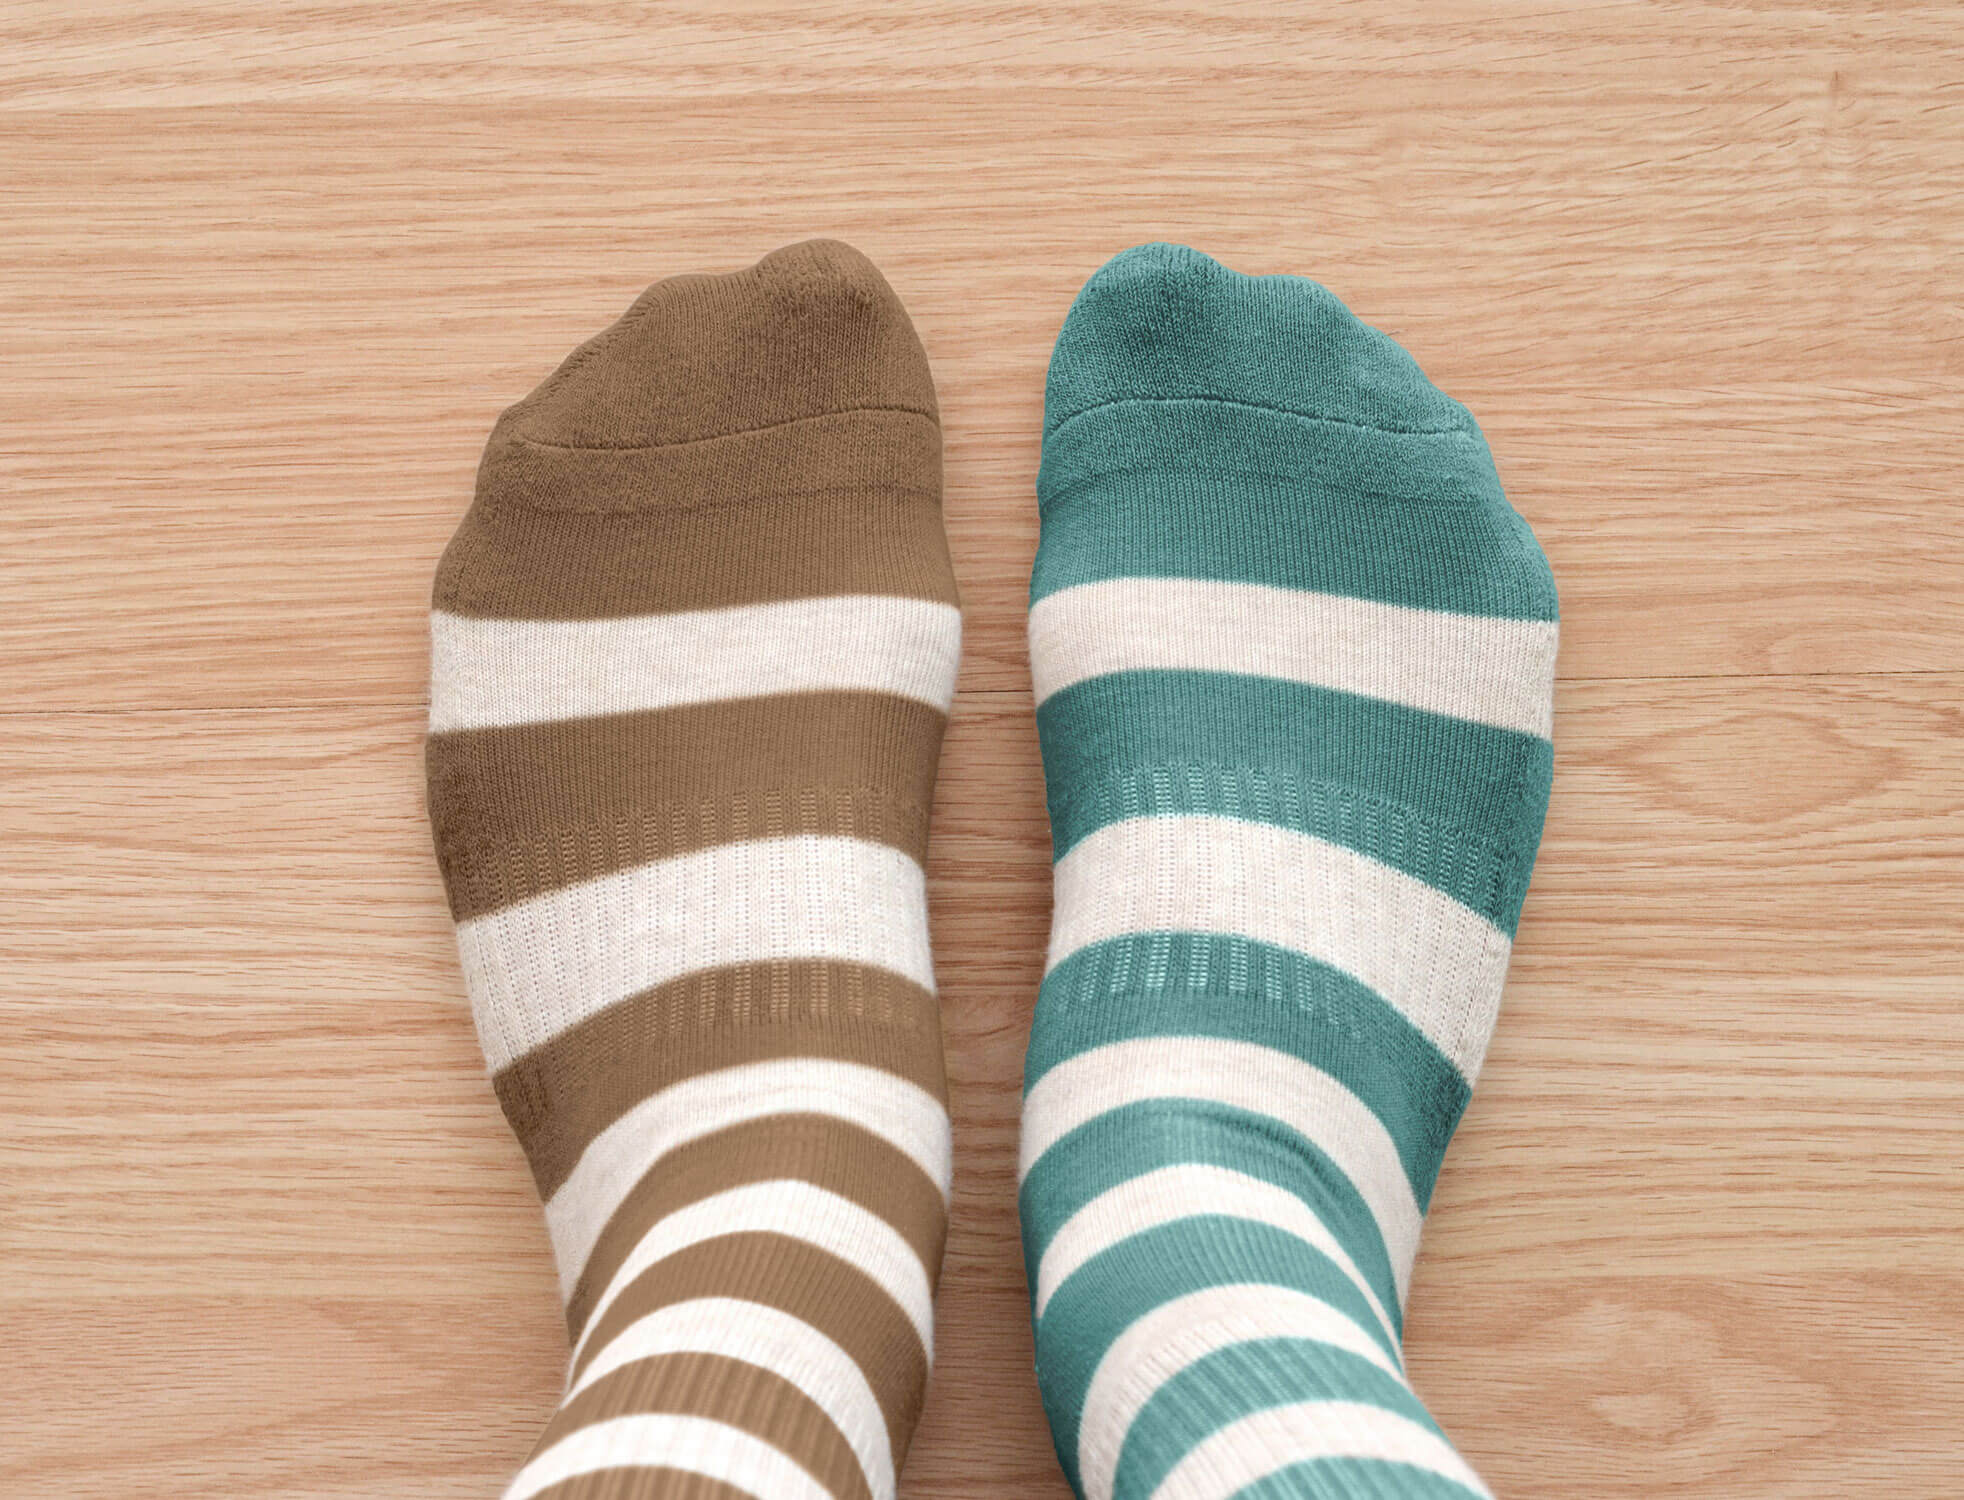 Two feet wearing brown and green mismatched, striped socks